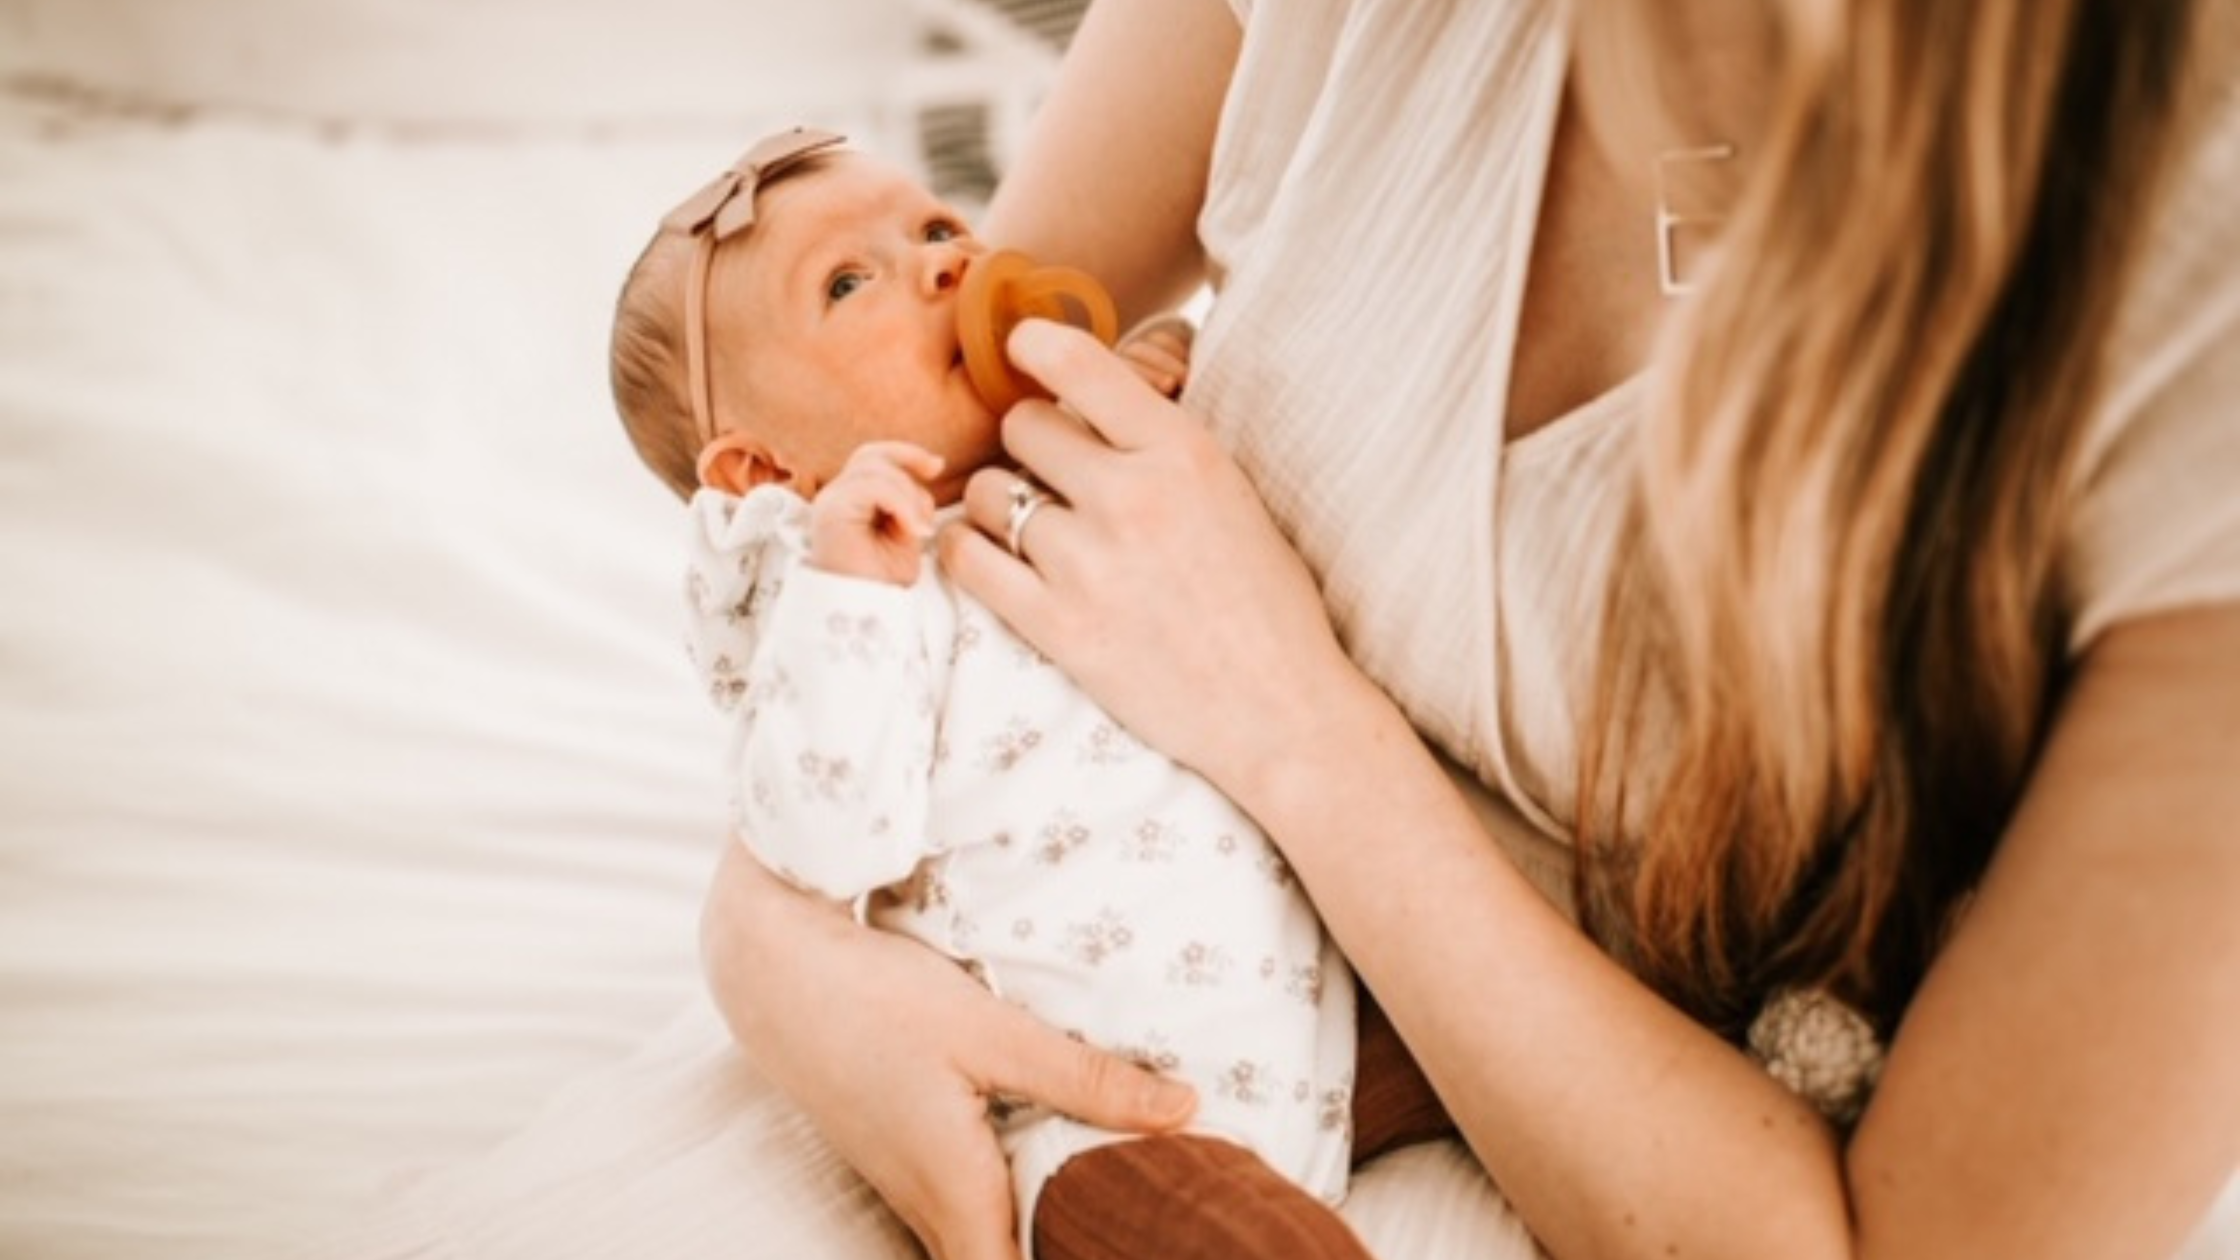 Why choose Ecopiggy Natural Rubber Pacifier?